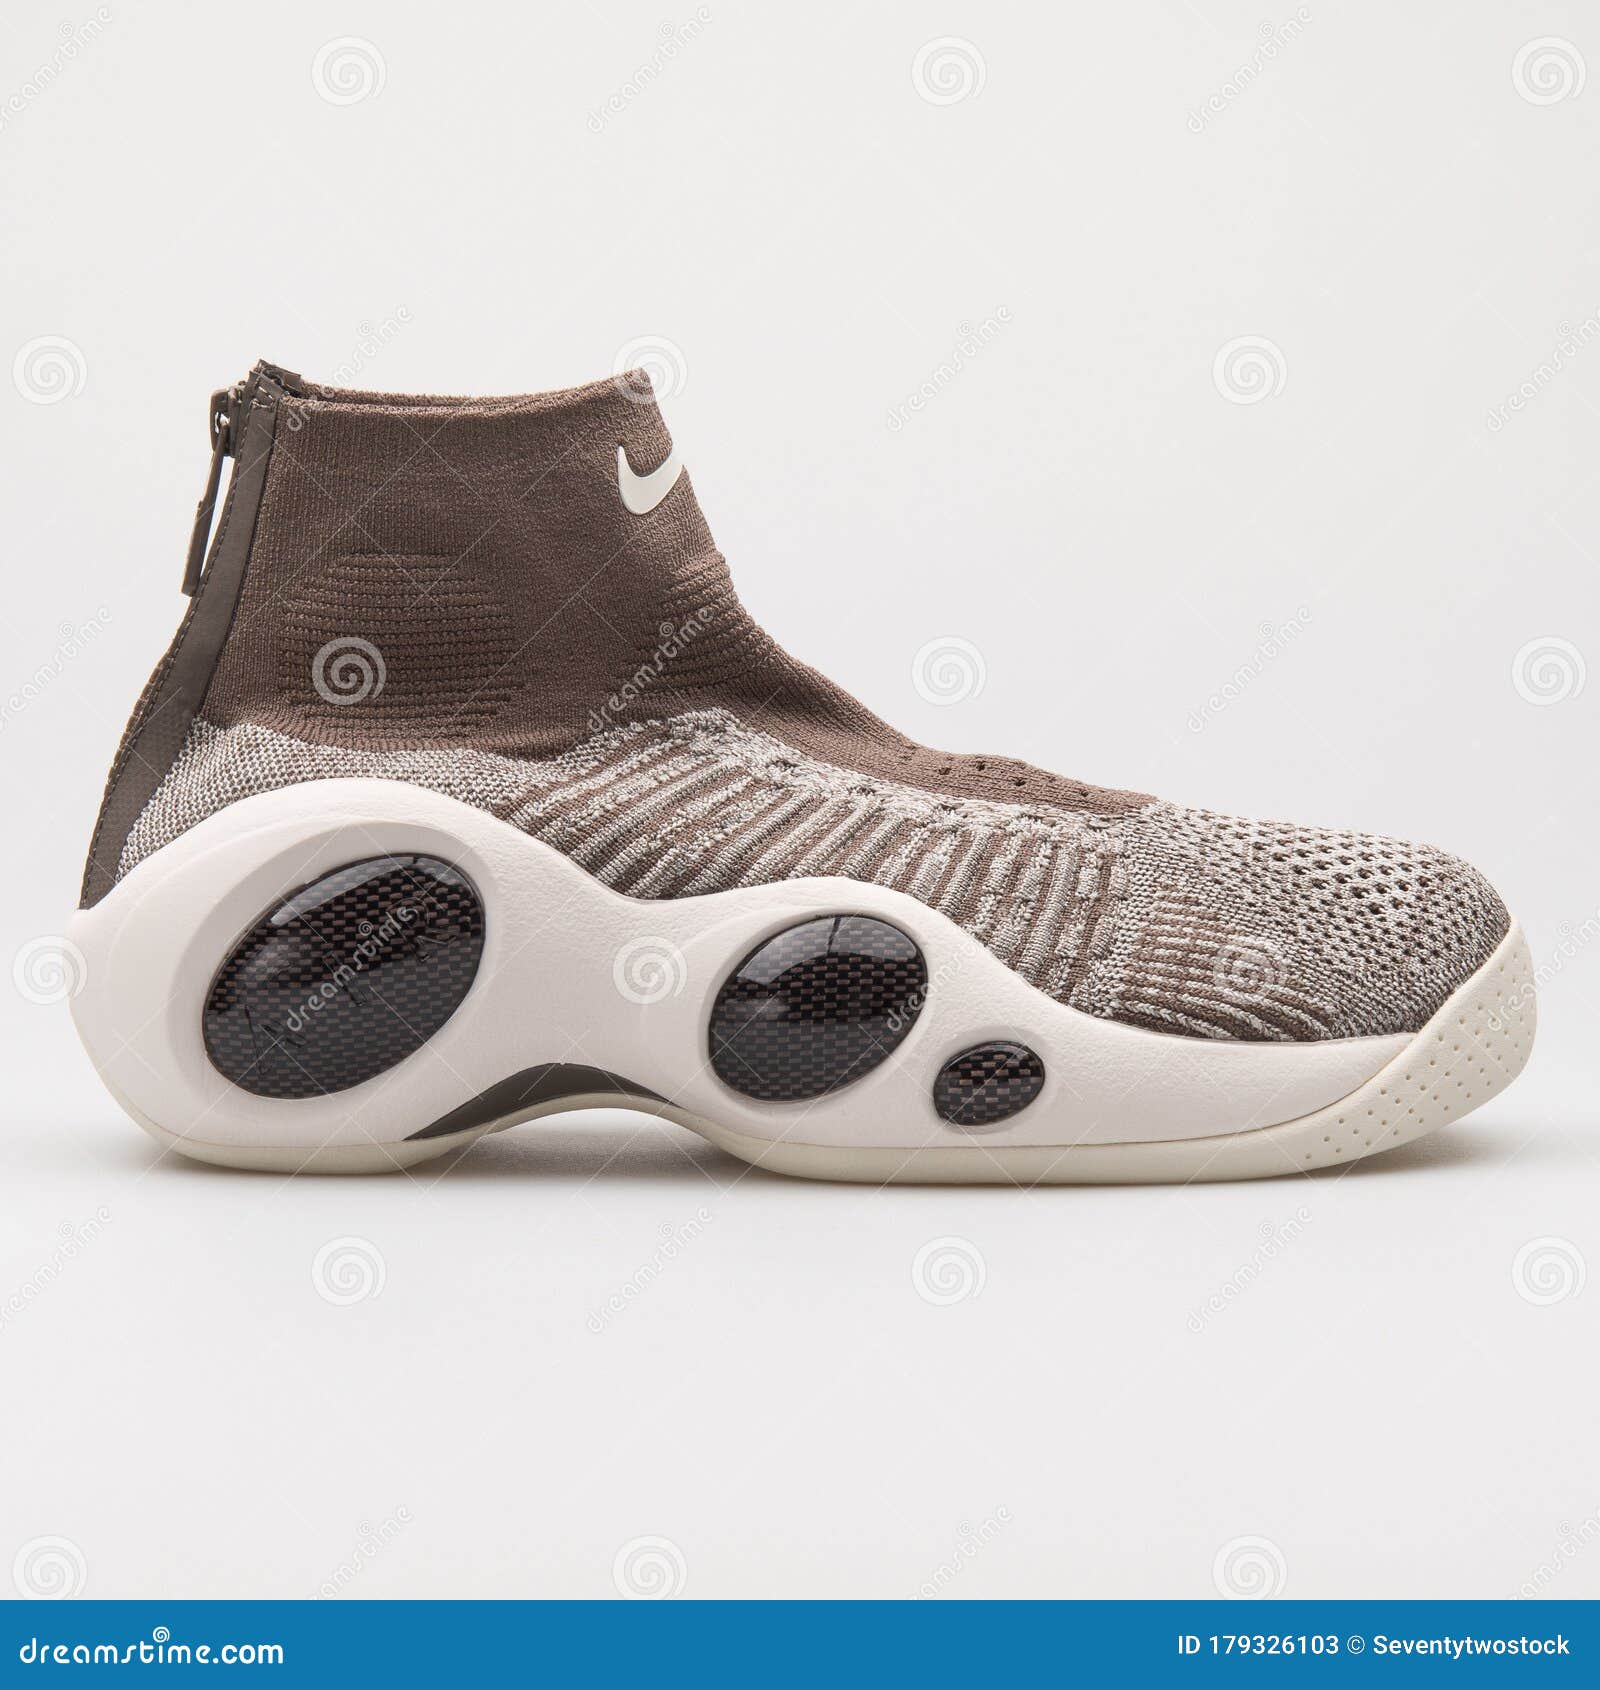 Nike Brown and Sneaker Editorial Stock Photo - Image of flight, activity: 179326103